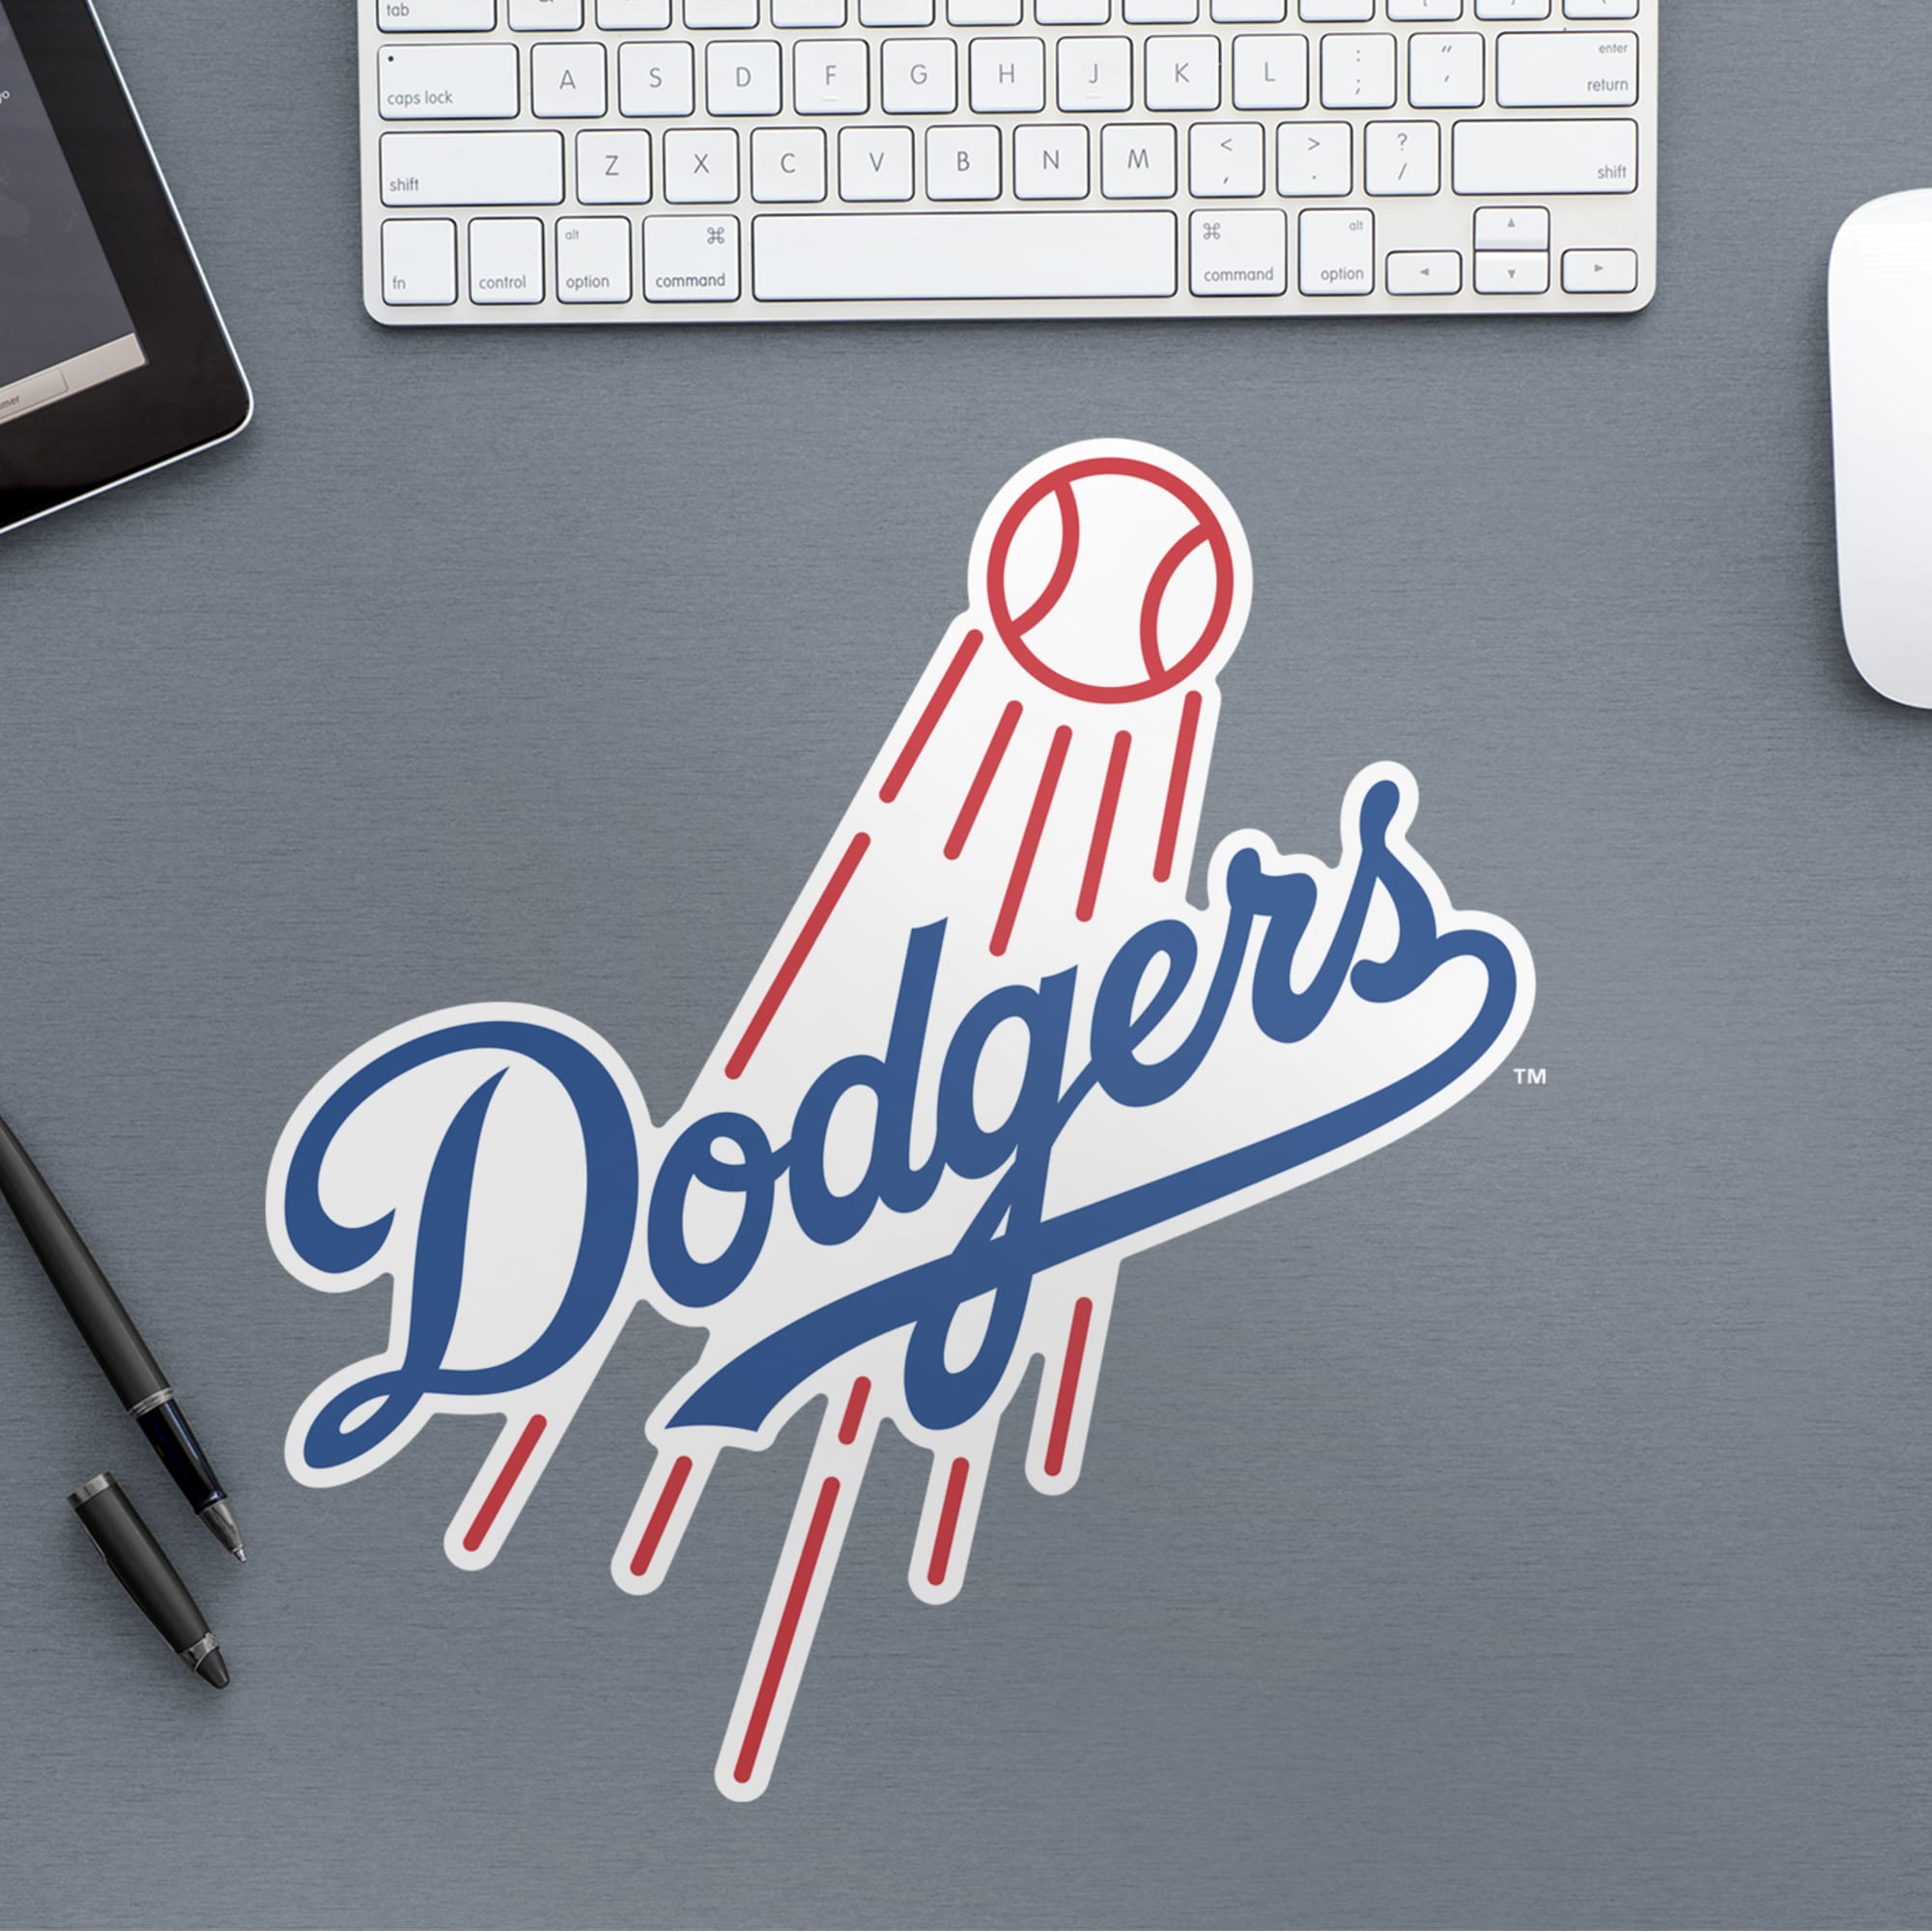 Los Angeles Dodgers: Logo - Officially Licensed MLB Removable Wall Decal Large by Fathead | Vinyl